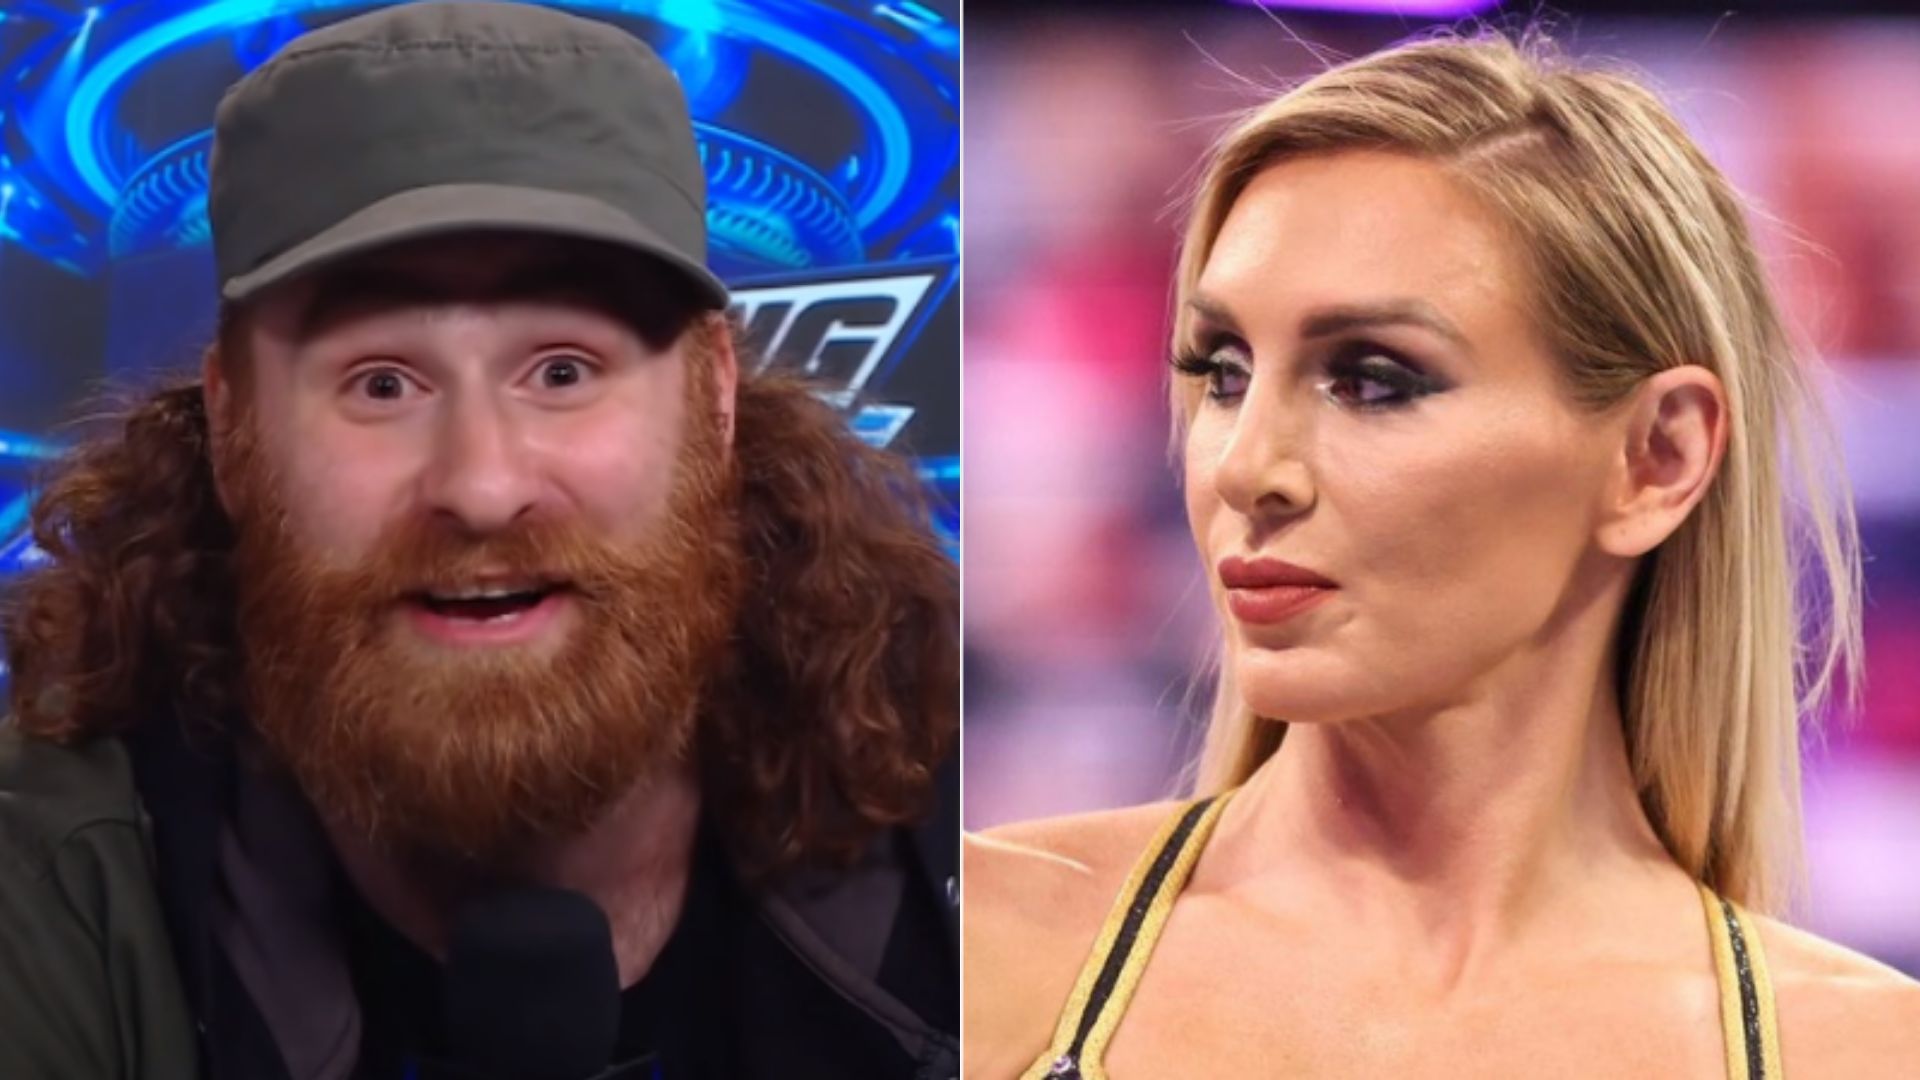 Sami Zayn and Charlotte Flair both currently hold titles in WWE